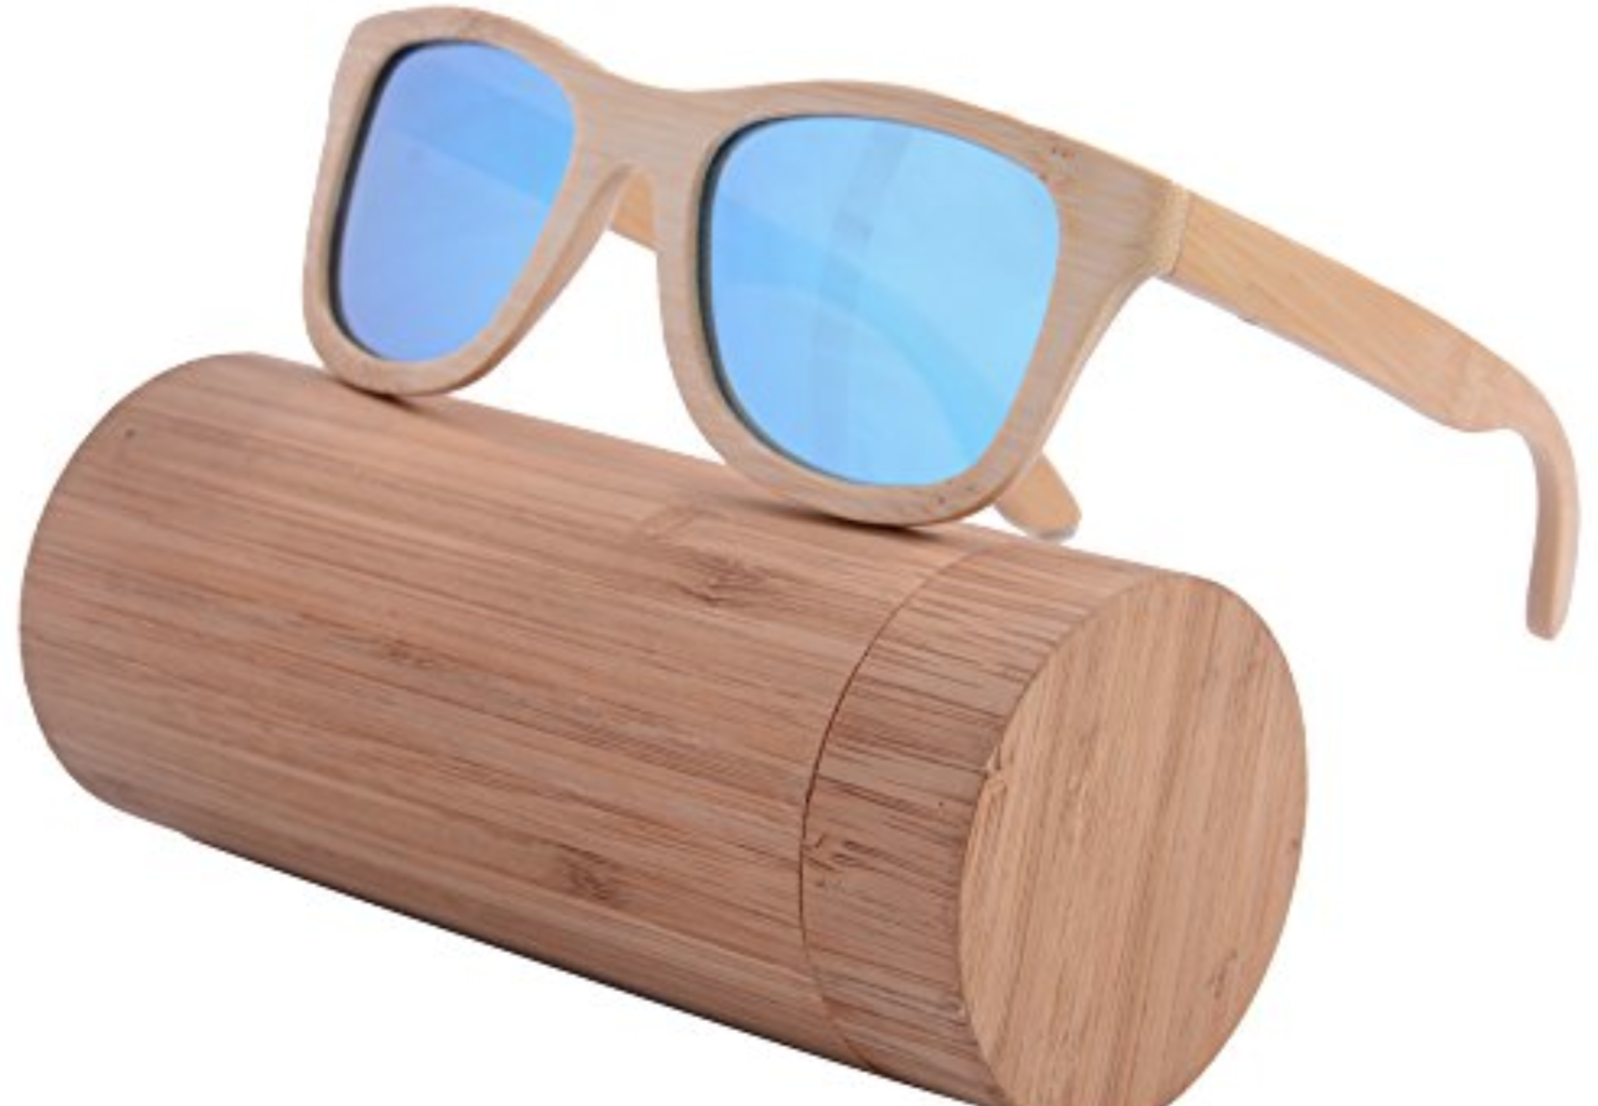 Why should you choose Wooden Sunglasses and how are they different?